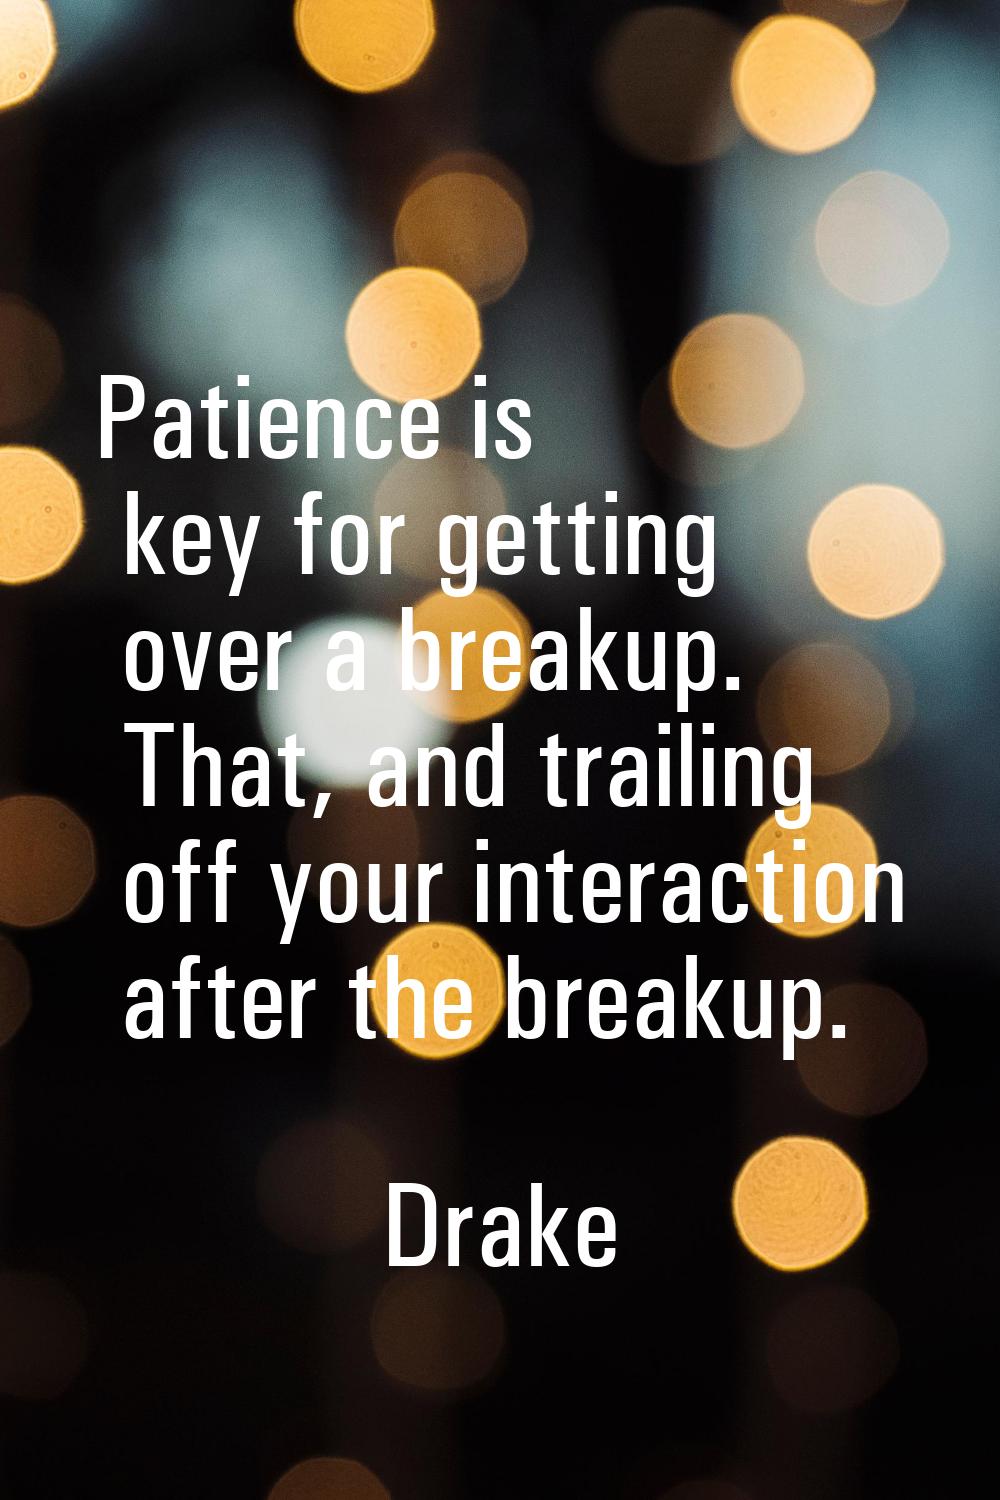 Patience is key for getting over a breakup. That, and trailing off your interaction after the break